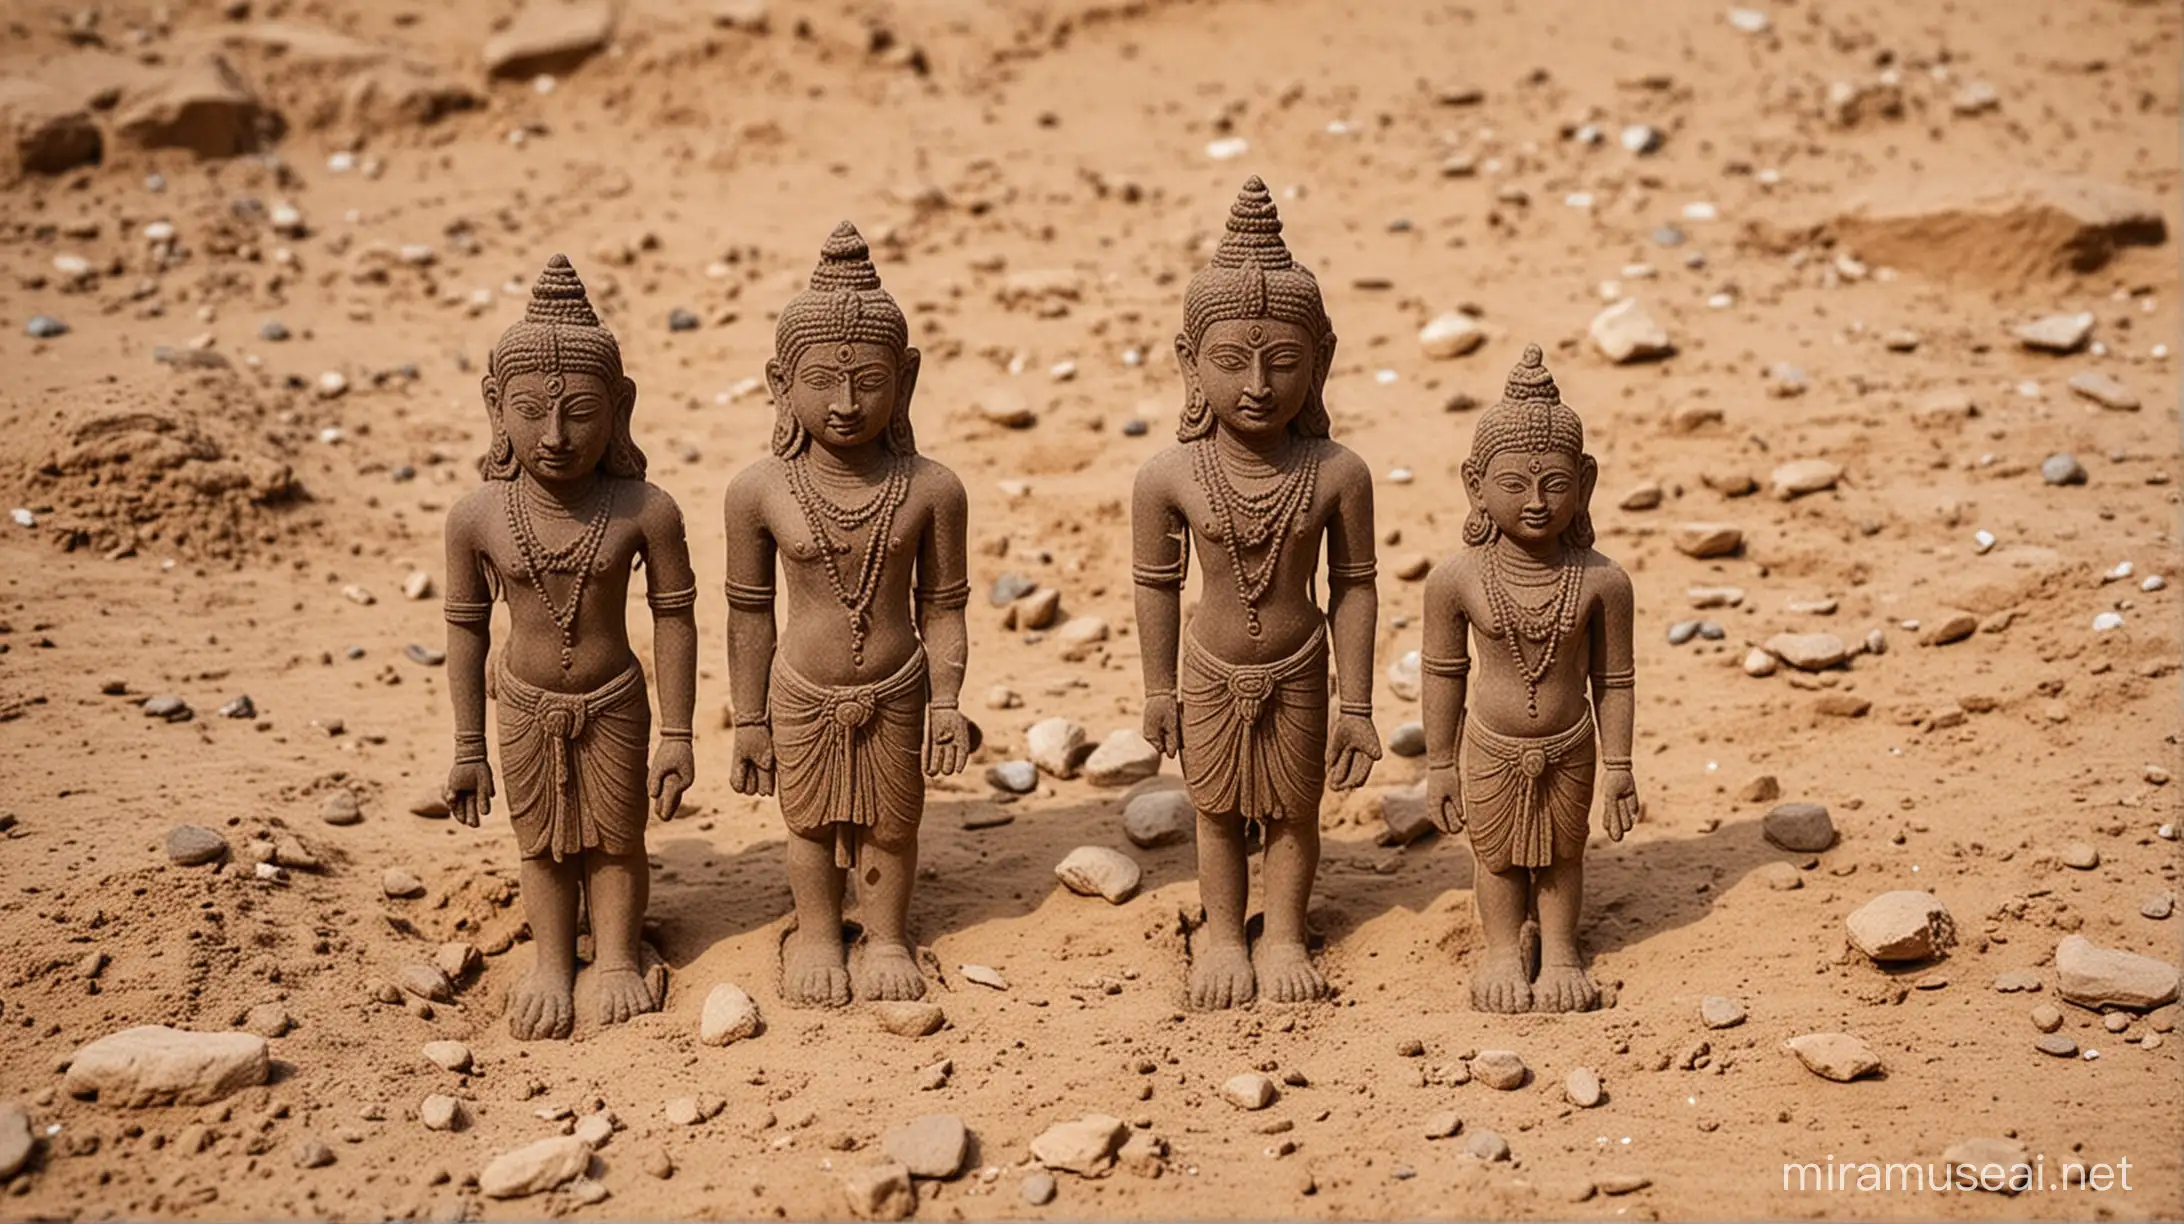 Ancient Indian Deity Statues Unearthed in Village Excavation